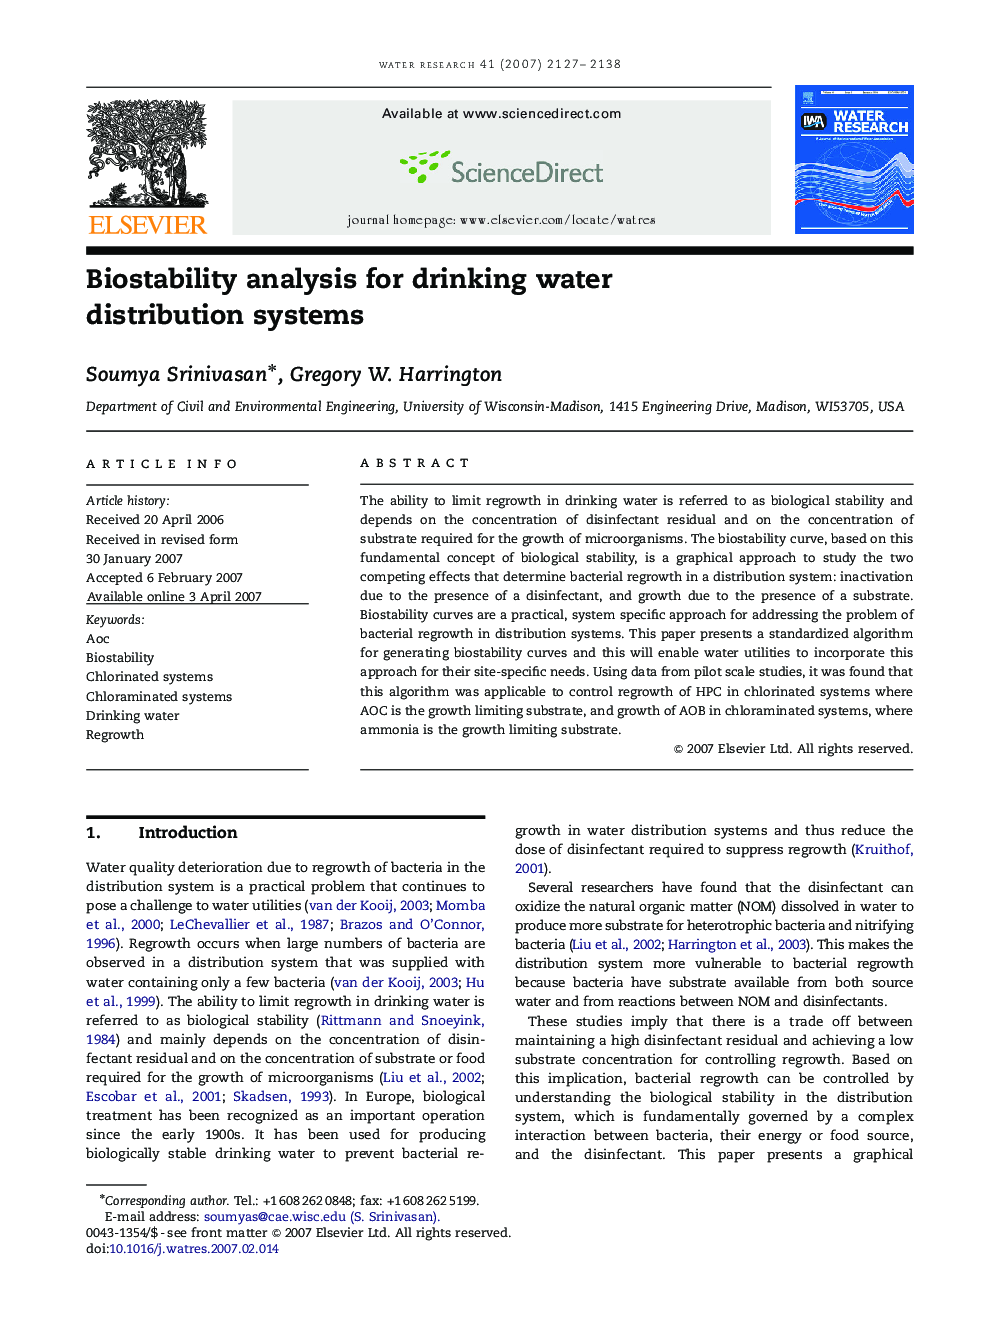 Biostability analysis for drinking water distribution systems